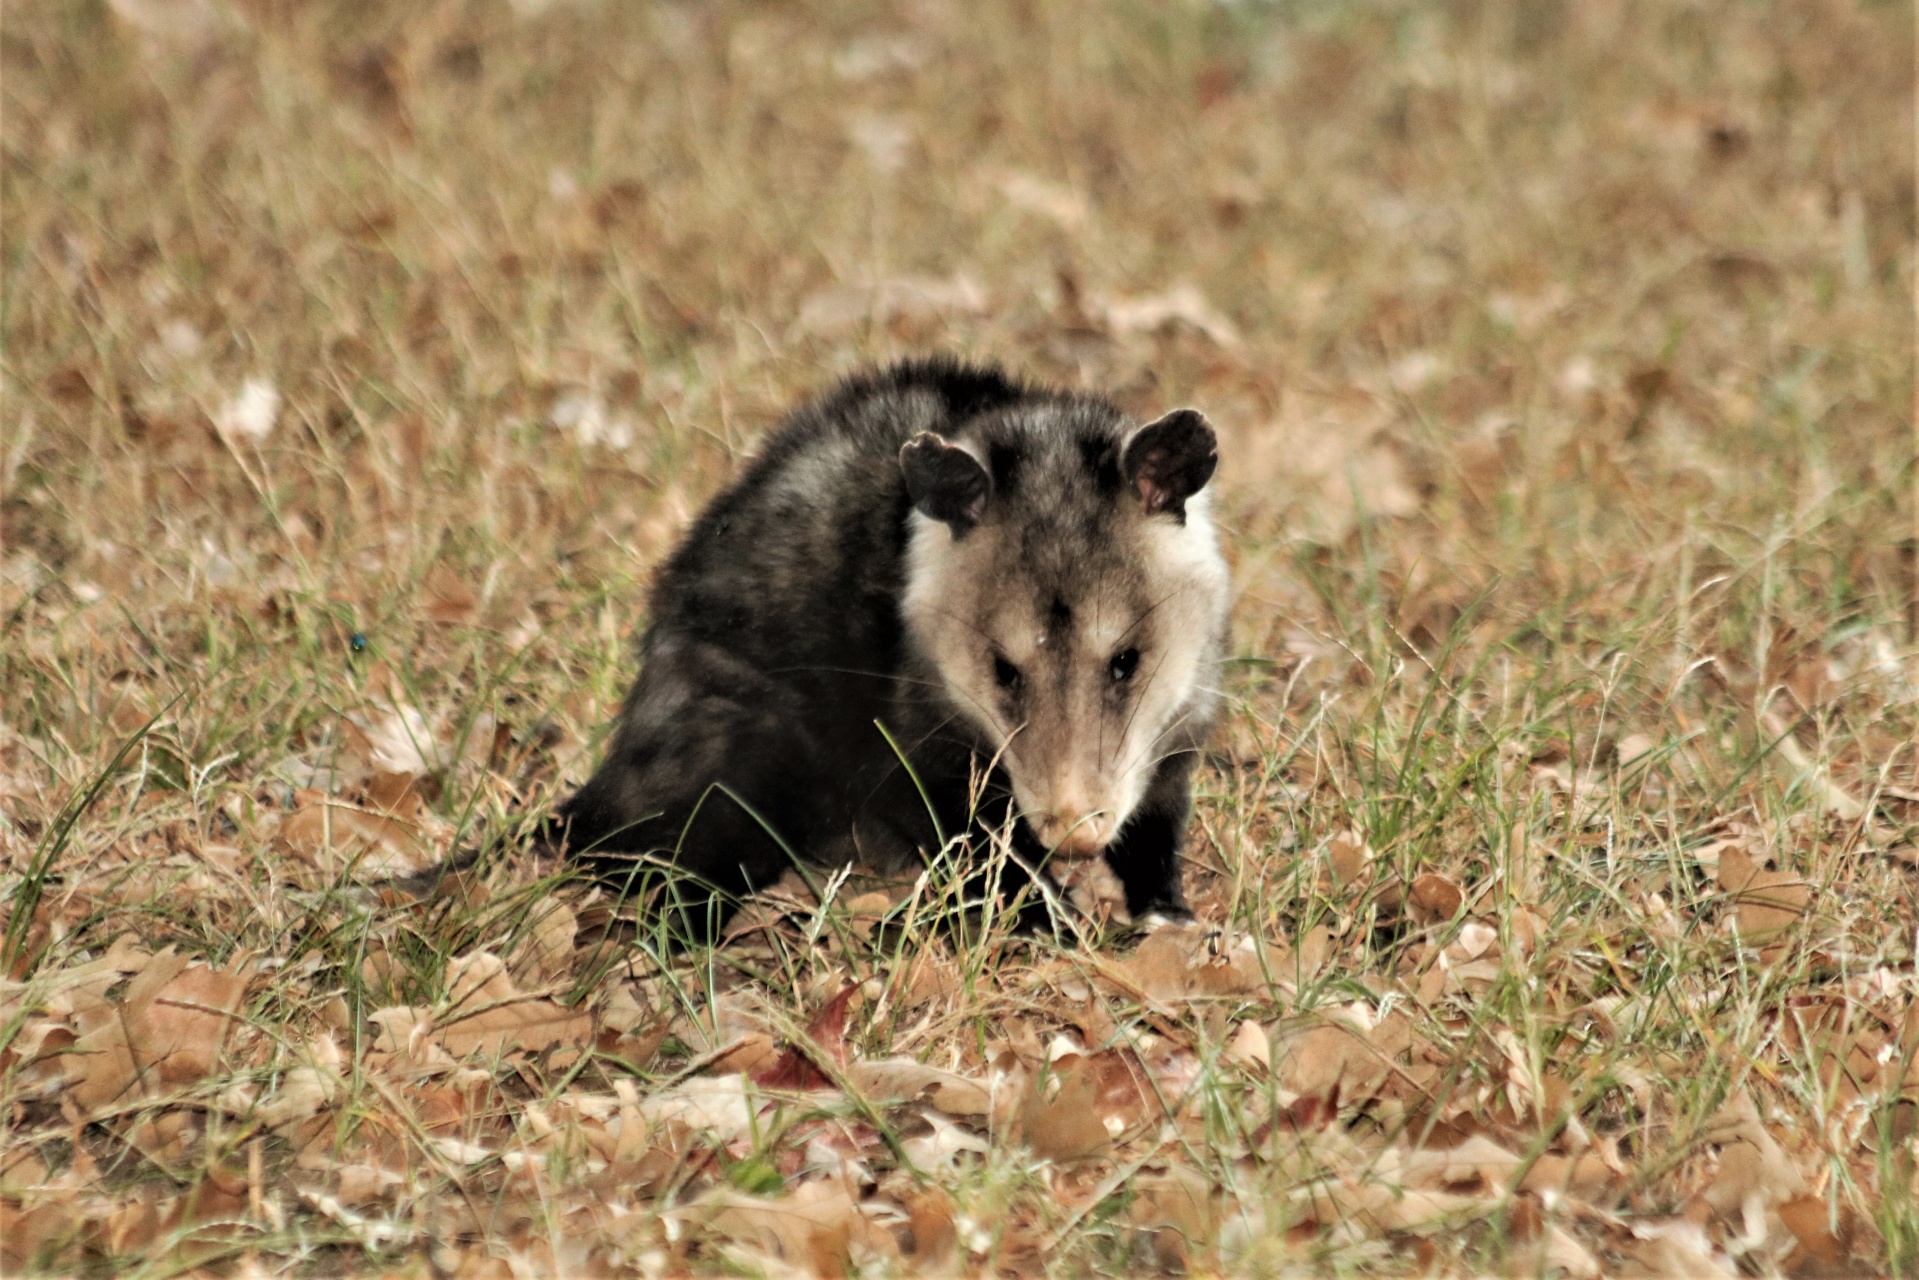 Close-up of an opossum sitting in grass, looking at the camera.